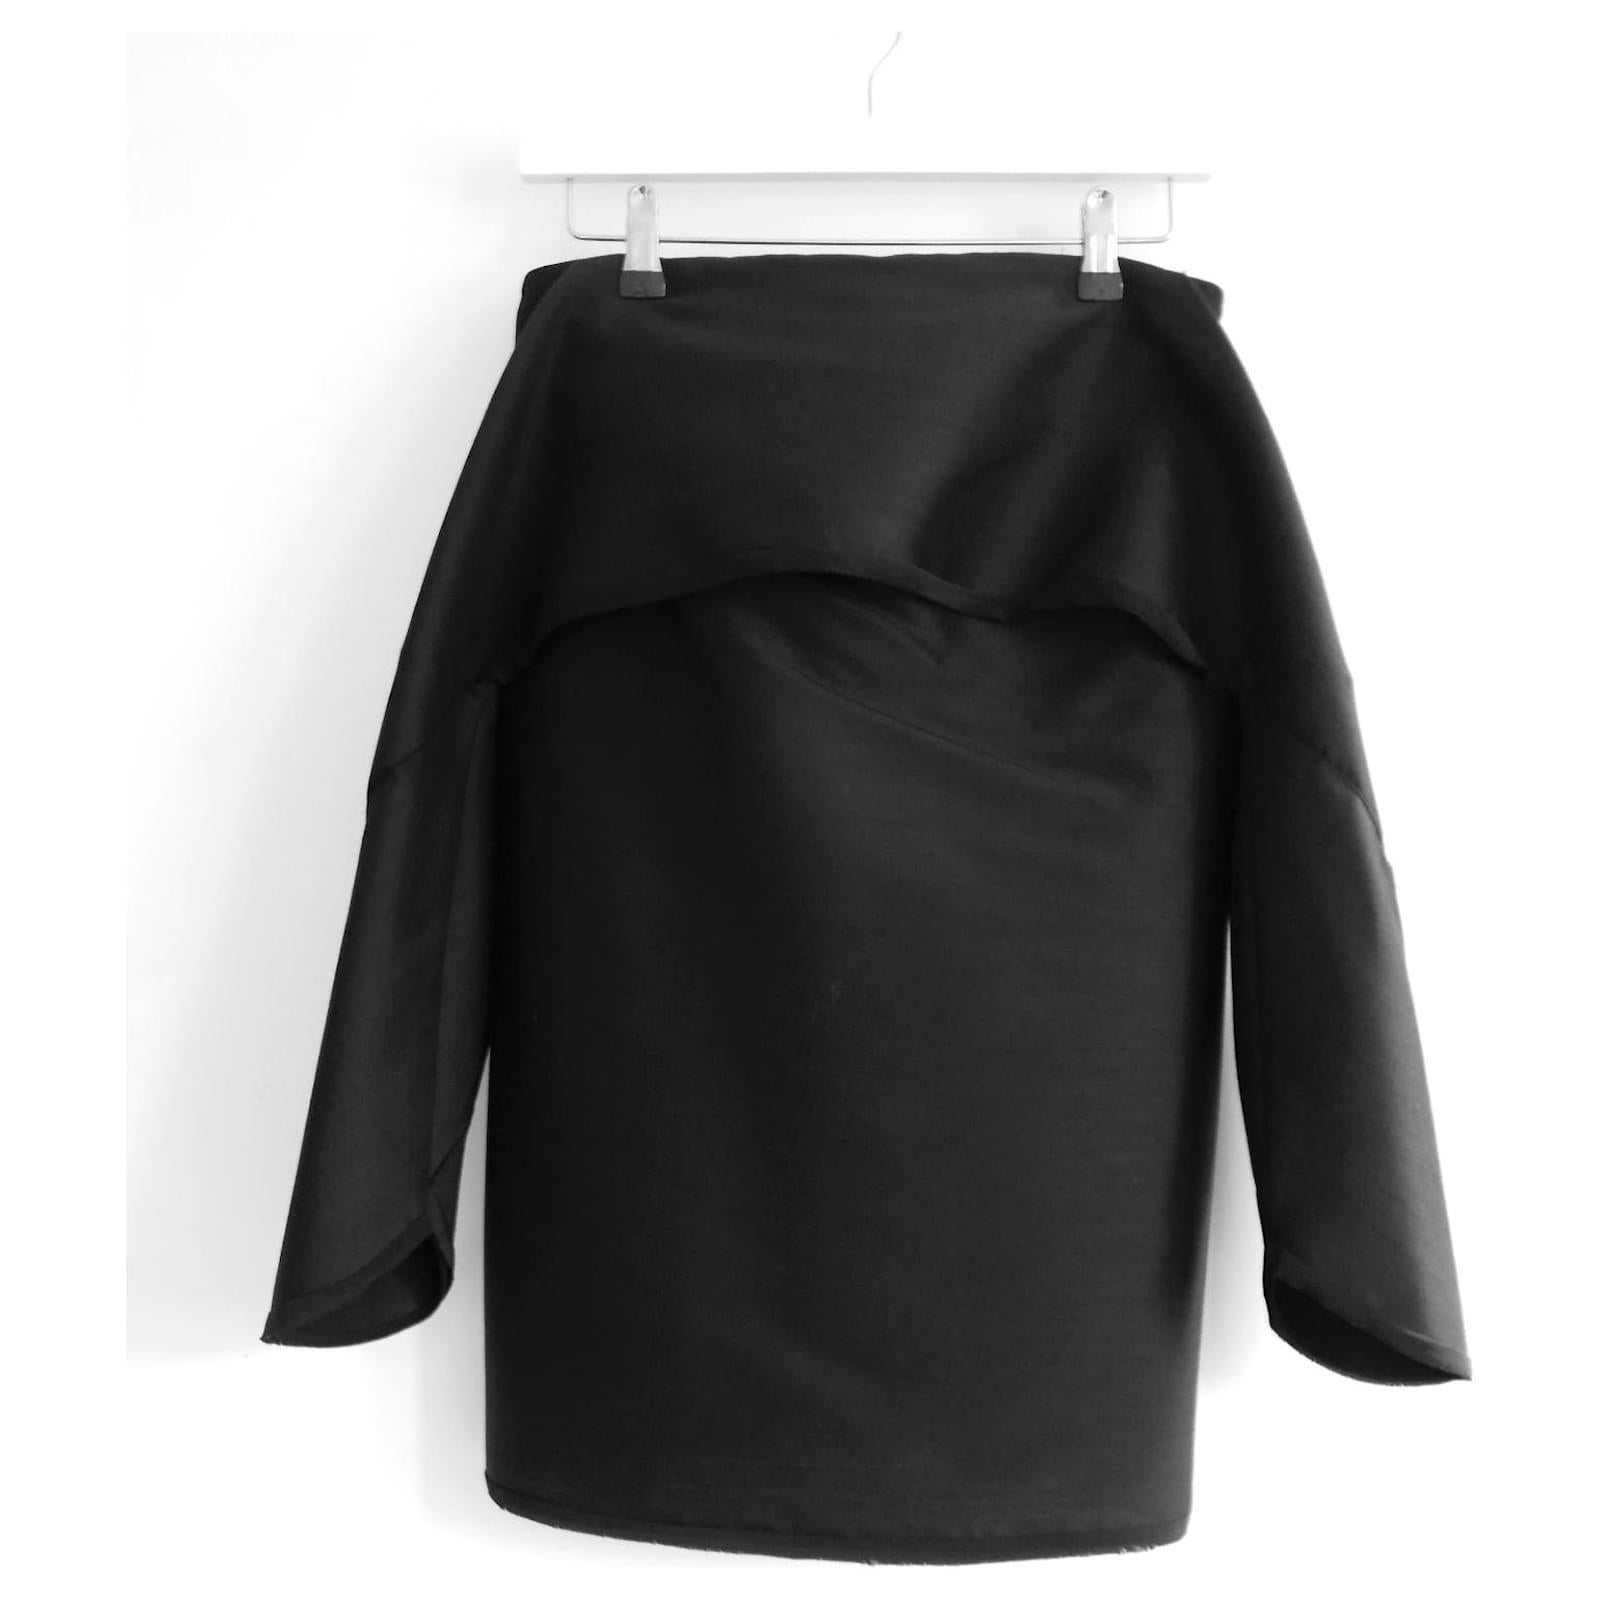 Modern minimalist Dion Lee off the shoulder taffeta mini dress. Bought for £850 and worn once. Has been dry cleaned. Made from glossy, sculptural wool and polyester, it has a bustier bodice with internal boned corset and front panel with attached